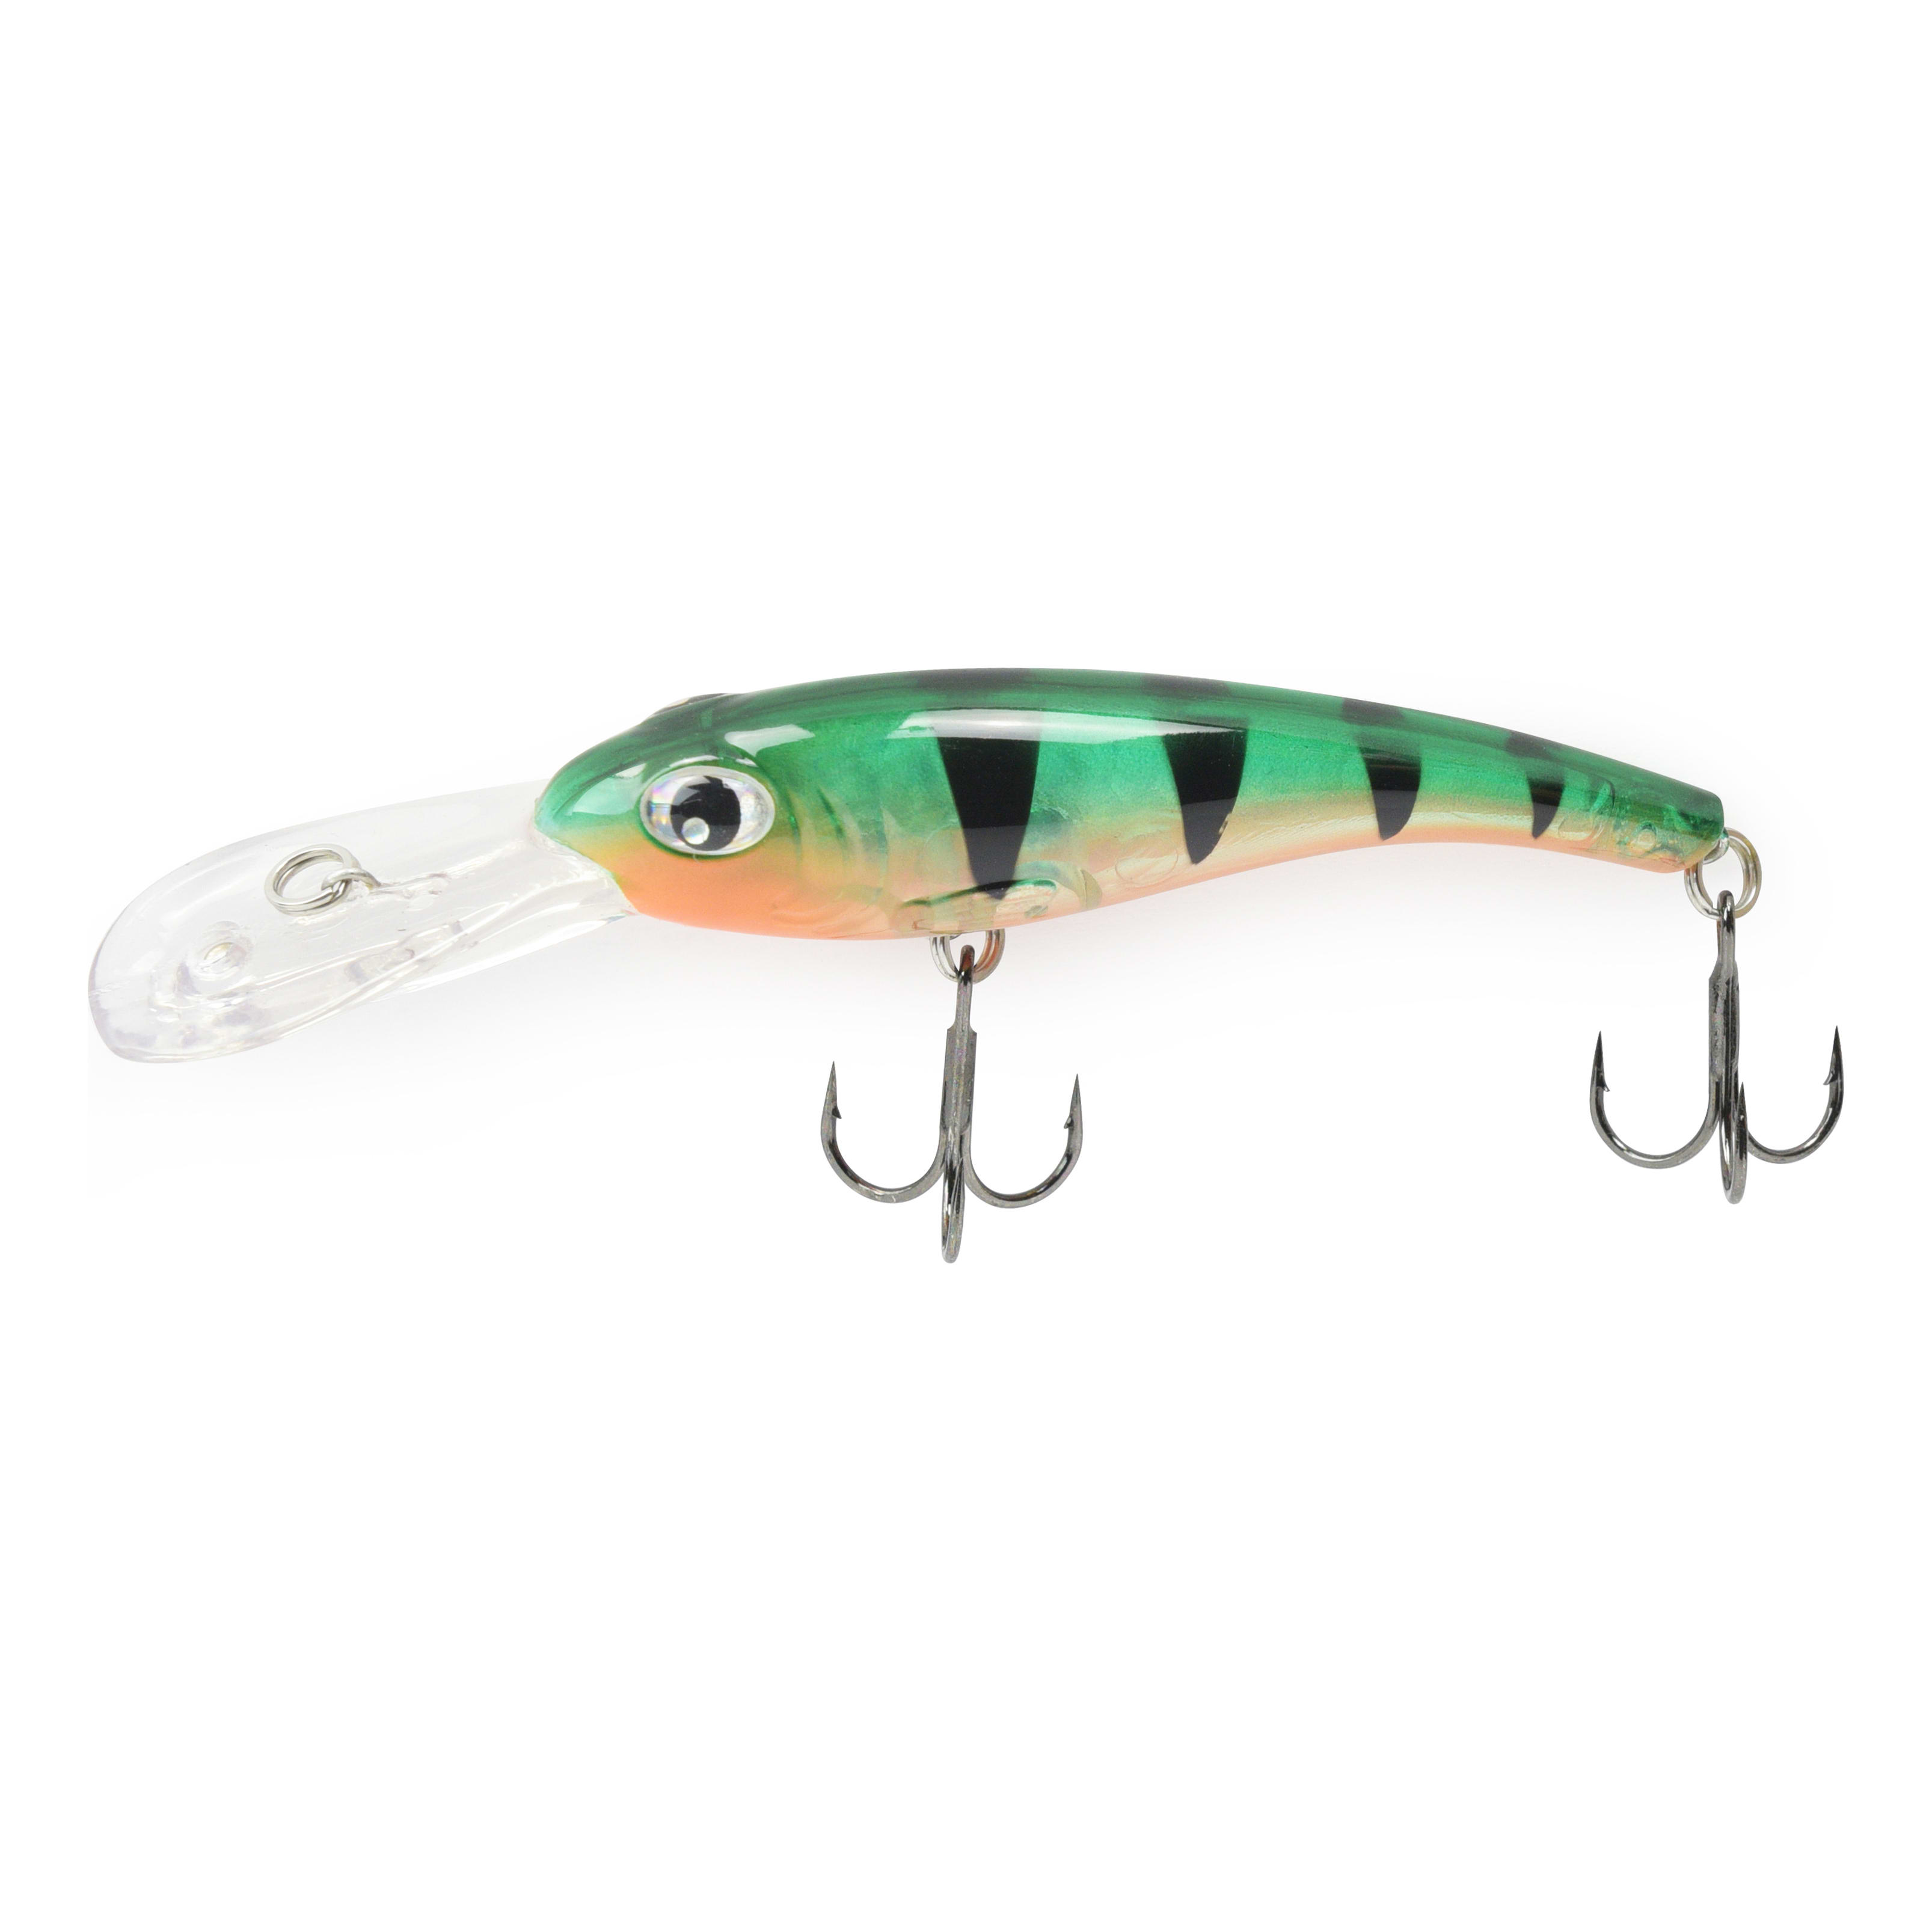 Lure Rapala Ultra Light Minnow 4 cm 3 gr - Nootica - Water addicts